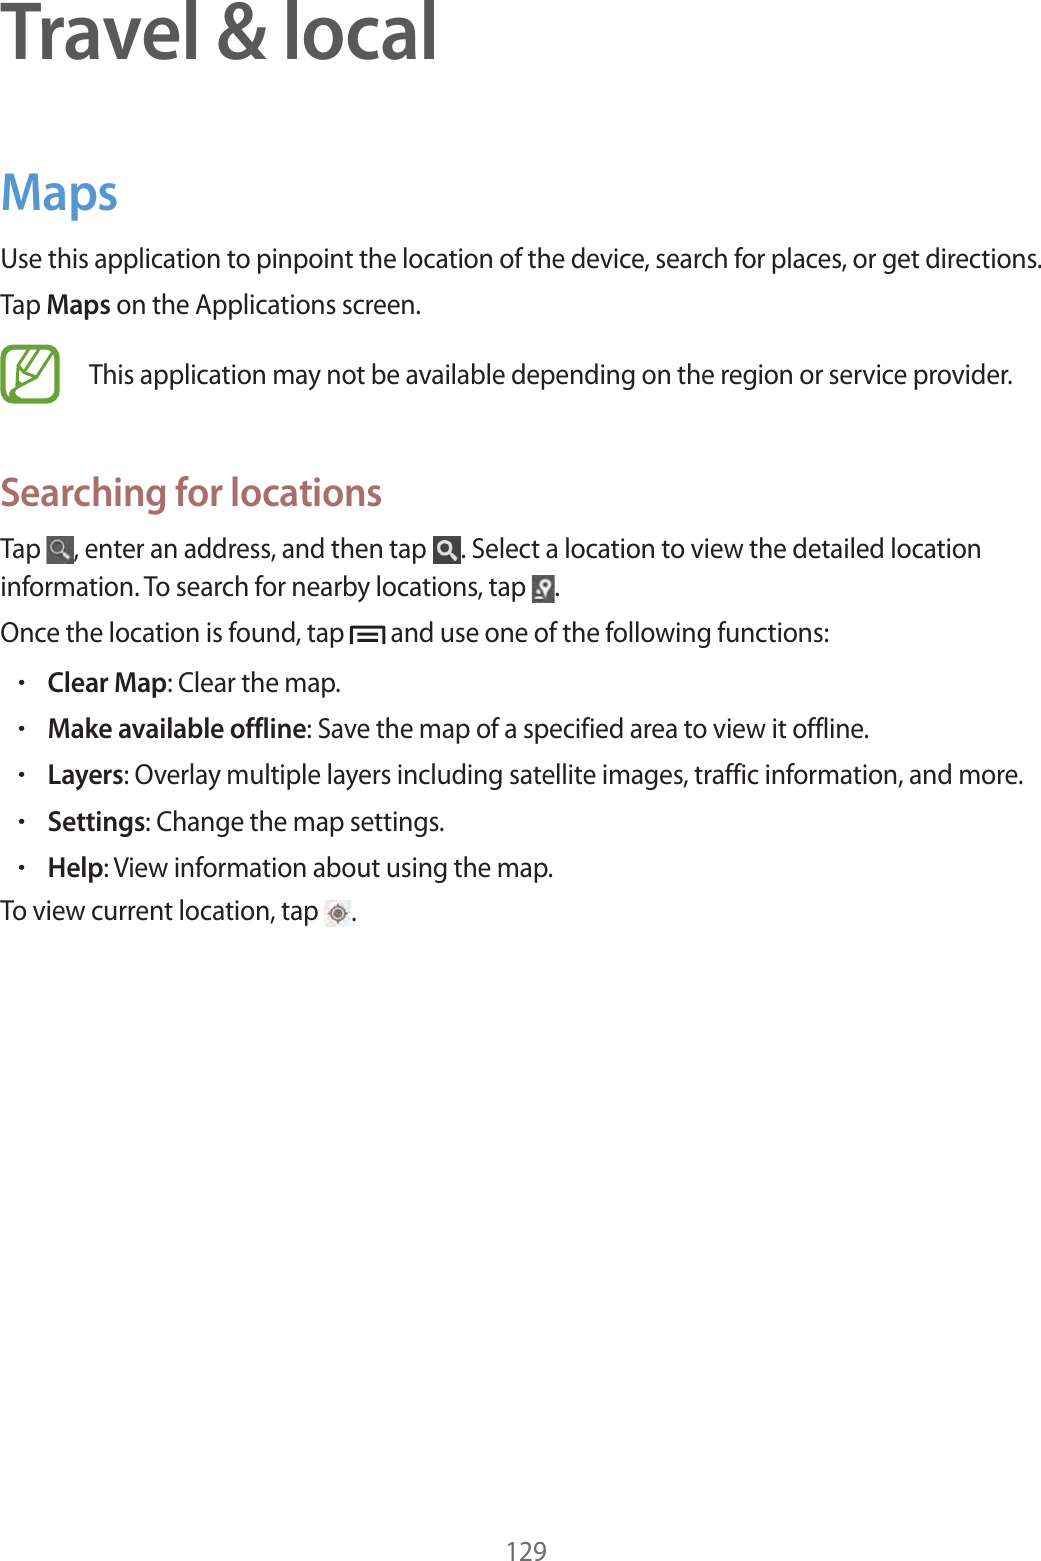 129Travel &amp; localMapsUse this application to pinpoint the location of the device, search for places, or get directions.Tap Maps on the Applications screen.This application may not be available depending on the region or service provider.Searching for locationsTap  , enter an address, and then tap  . Select a location to view the detailed location information. To search for nearby locations, tap  .Once the location is found, tap   and use one of the following functions:rClear Map: Clear the map.rMake available offline: Save the map of a specified area to view it offline.rLayers: Overlay multiple layers including satellite images, traffic information, and more.rSettings: Change the map settings.rHelp: View information about using the map.To view current location, tap  .